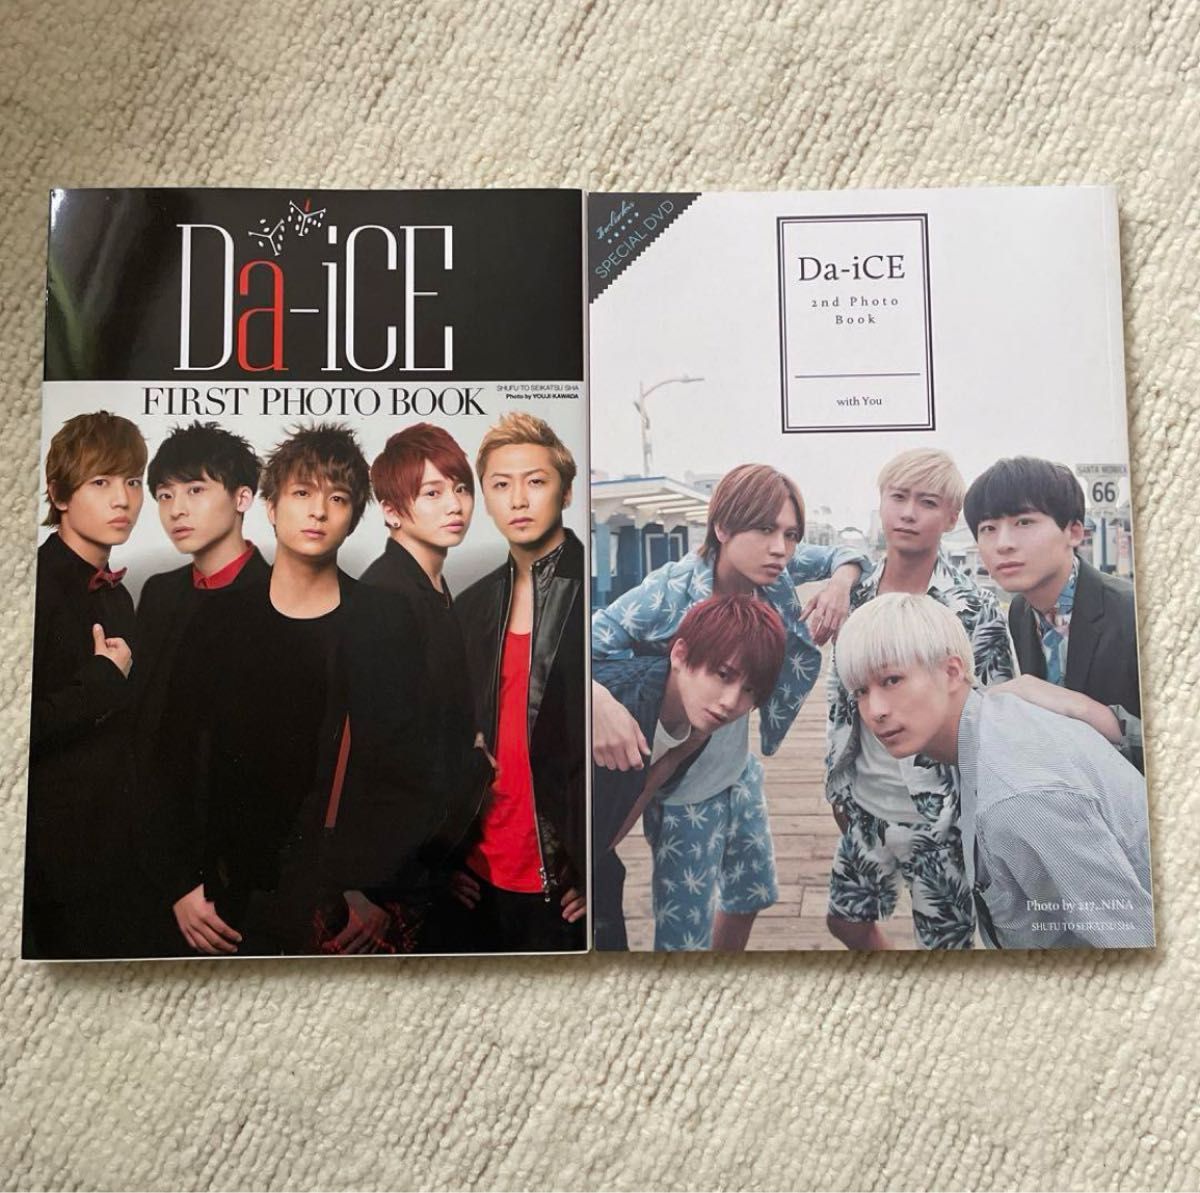 Da-iCE 2nd Photo Book with You - タレントグッズ